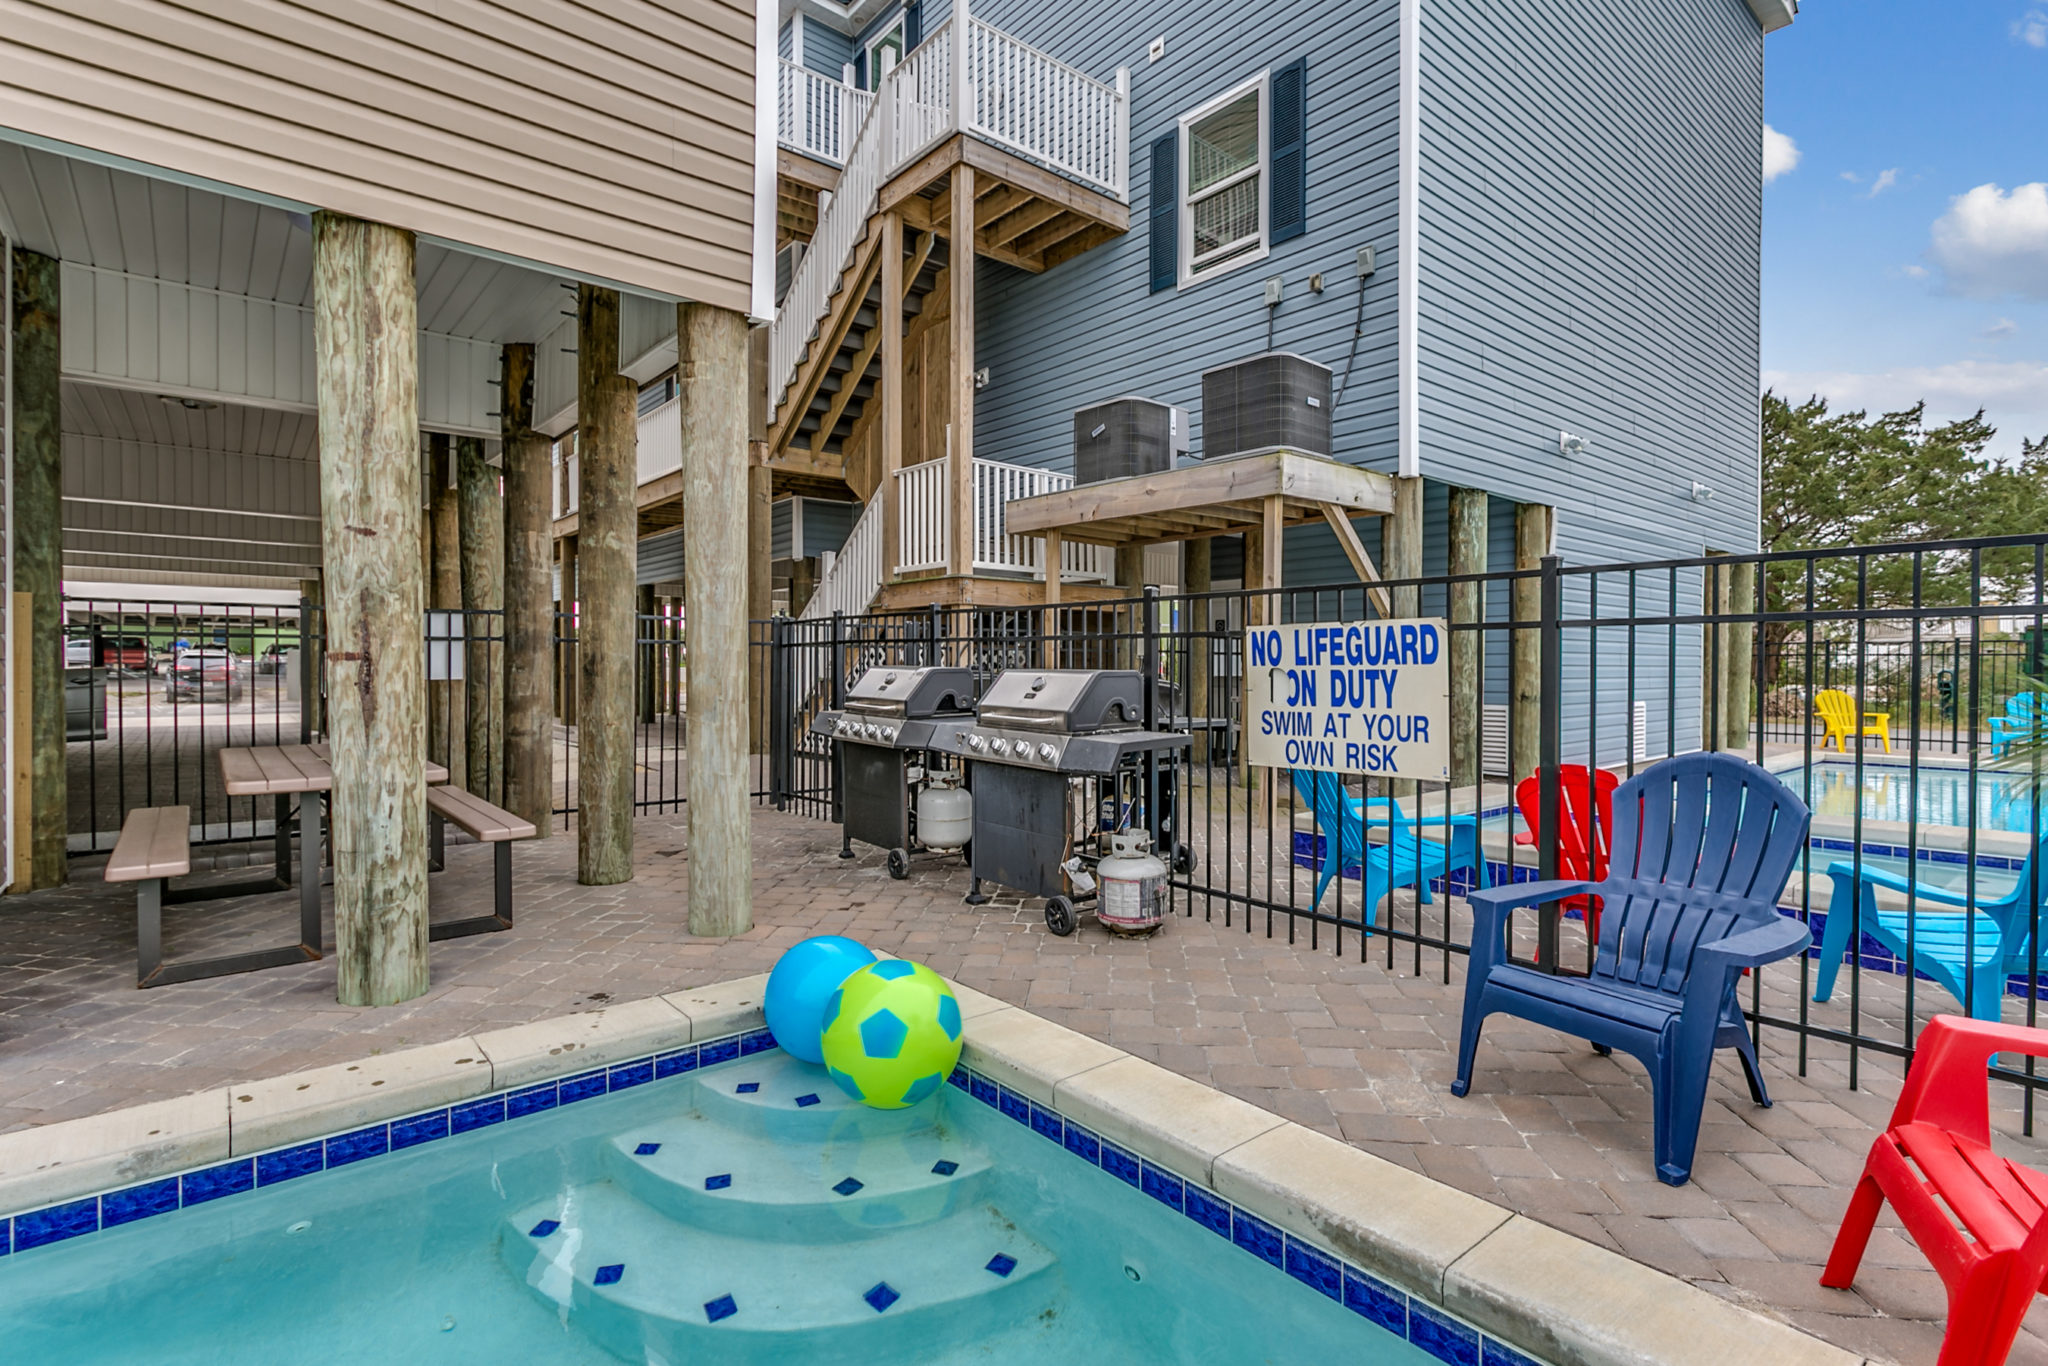 2201 Spring Street outdoor pool, patio, picnic table, gas grills, Adirondack chairs.